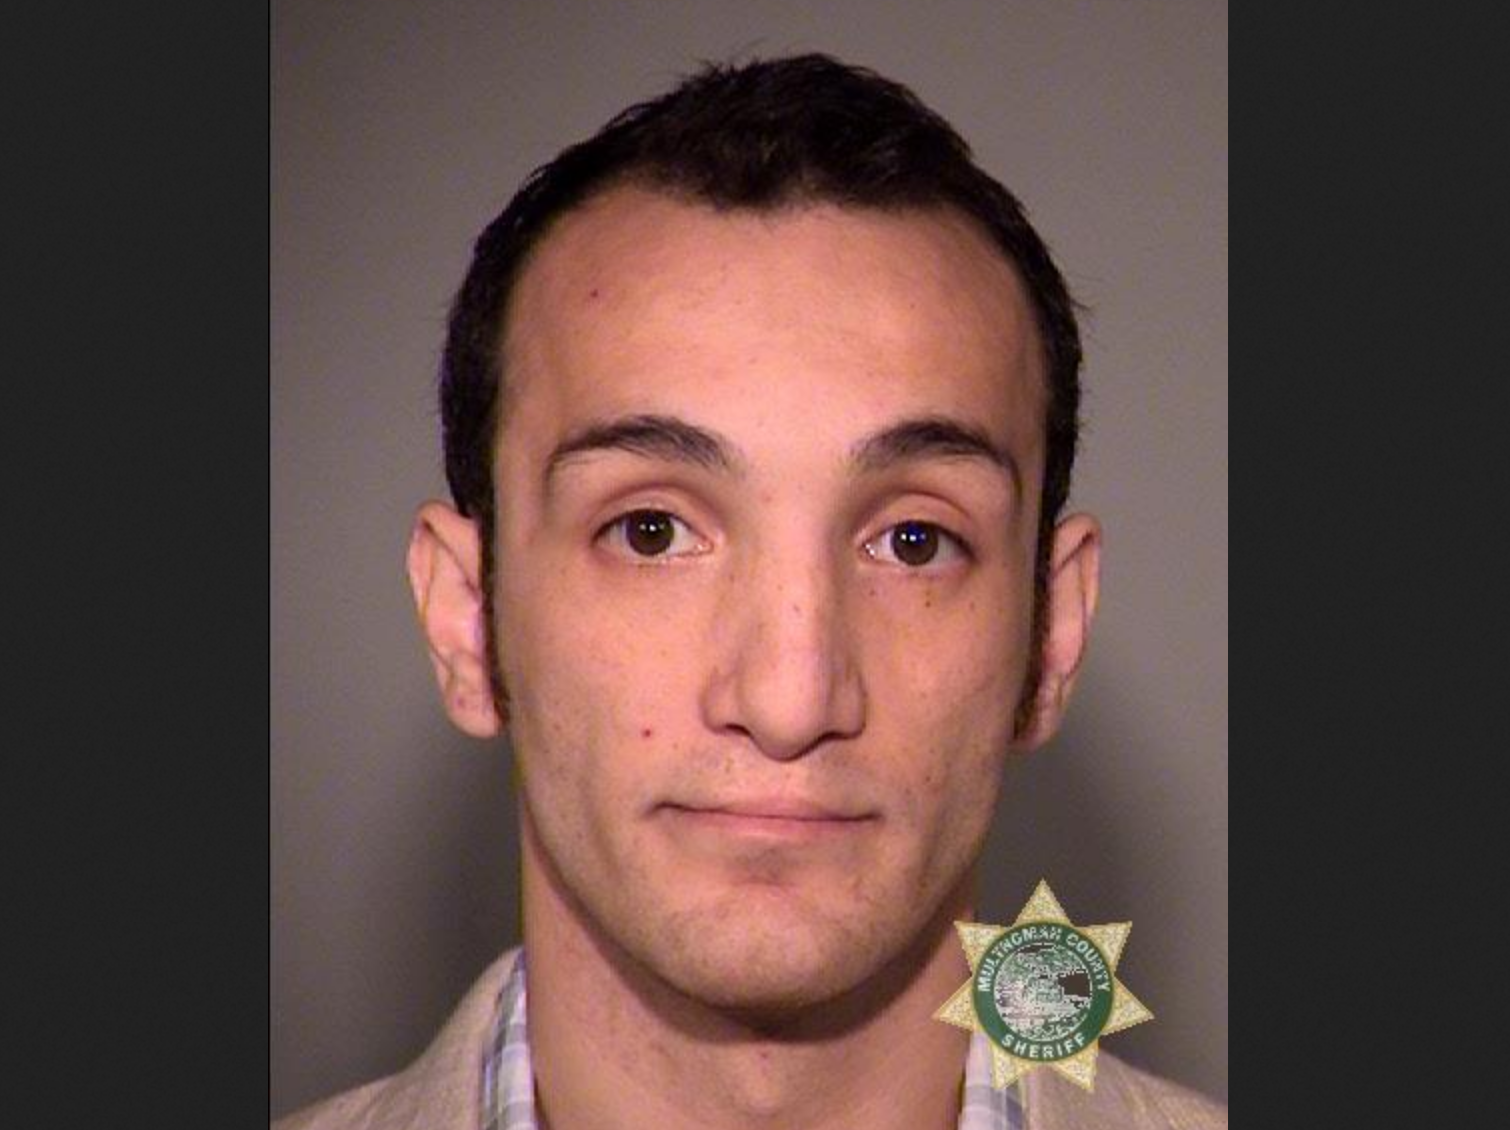 Office Bare Bottom Spanking - Man who recorded himself spanking girl's bottom gets 17 years in prison -  oregonlive.com